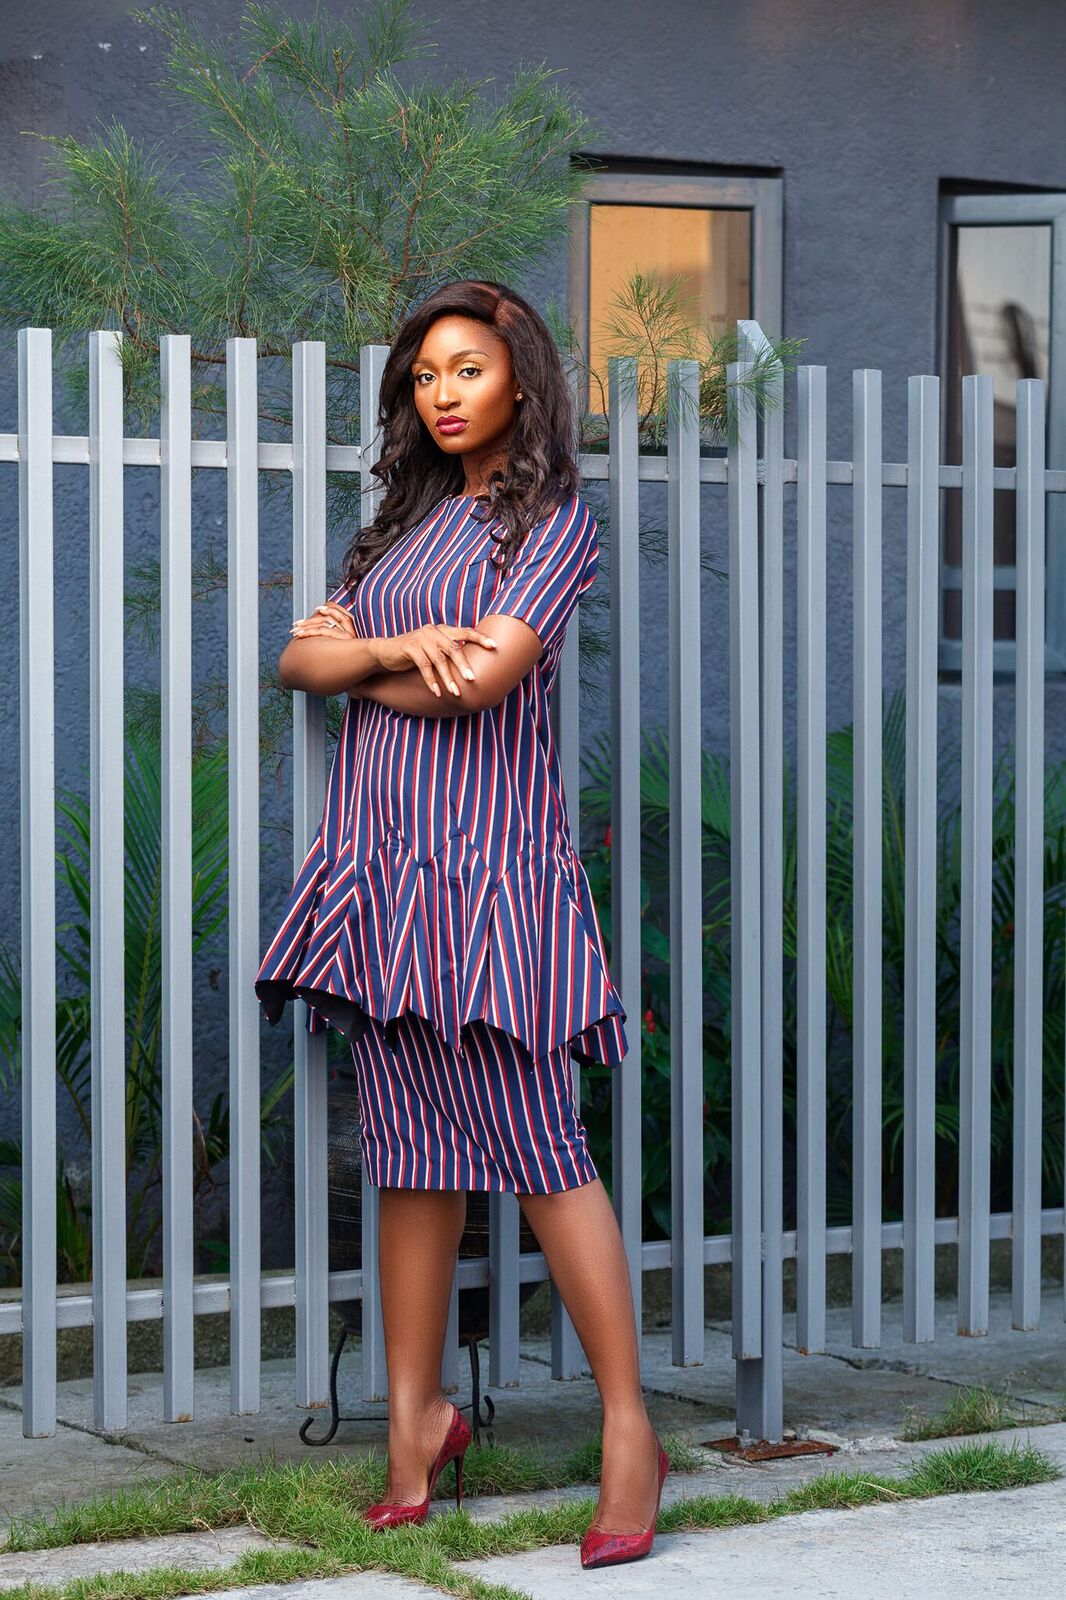 Powede Awujo Is The Perfect Muse For Lady Biba’s “Lady In Line” Campaign